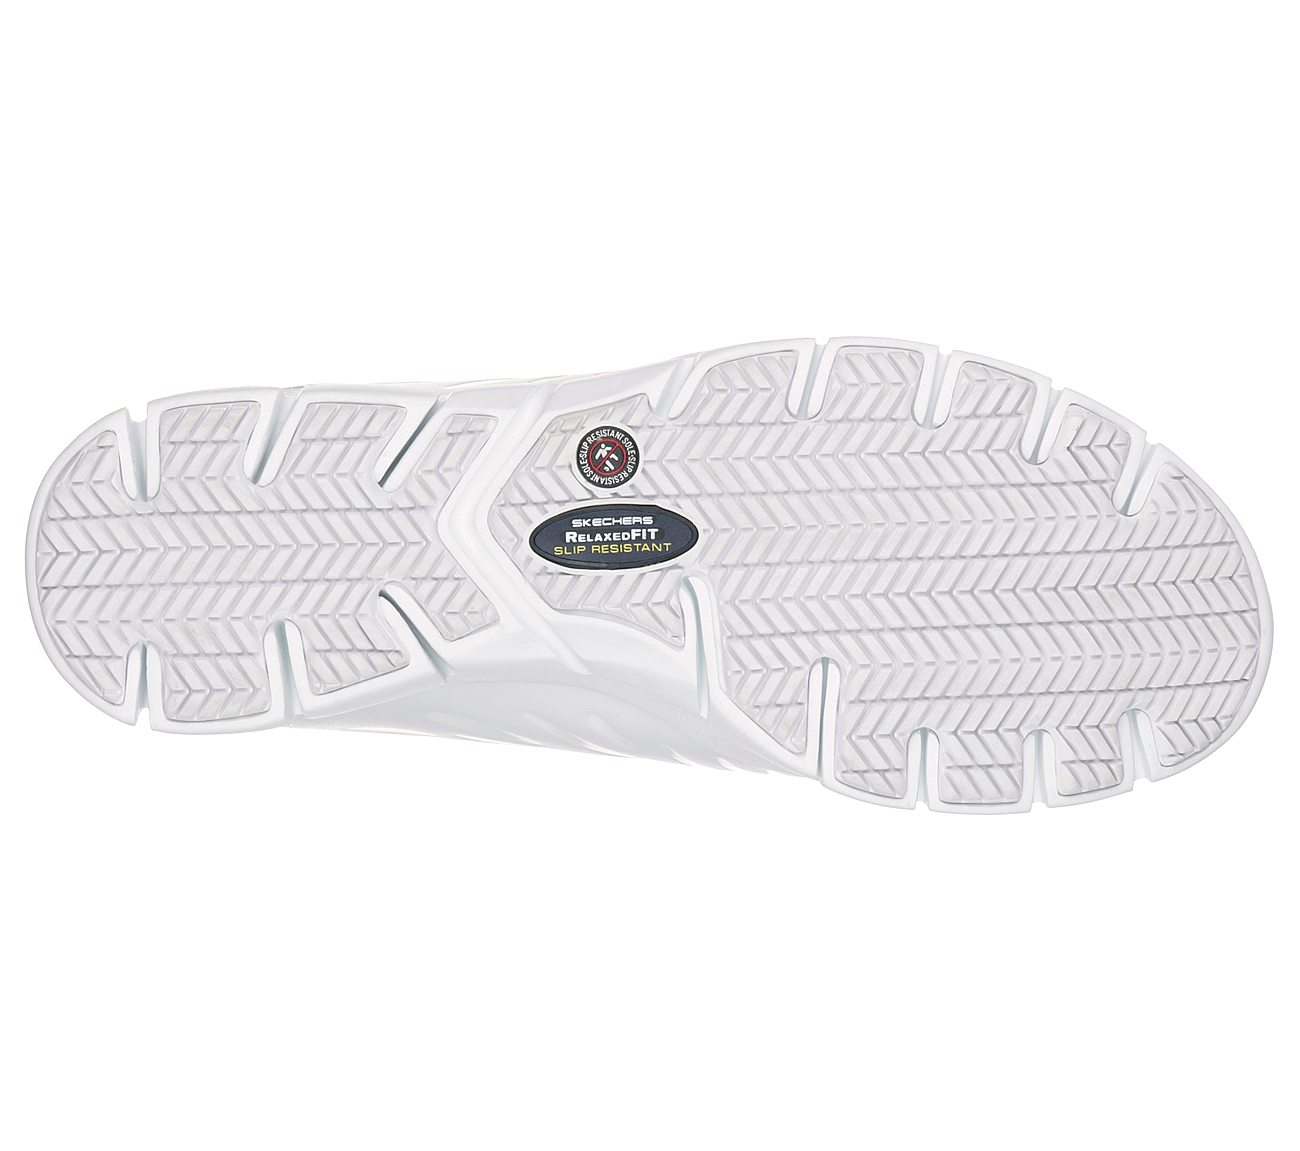 skechers white work shoes